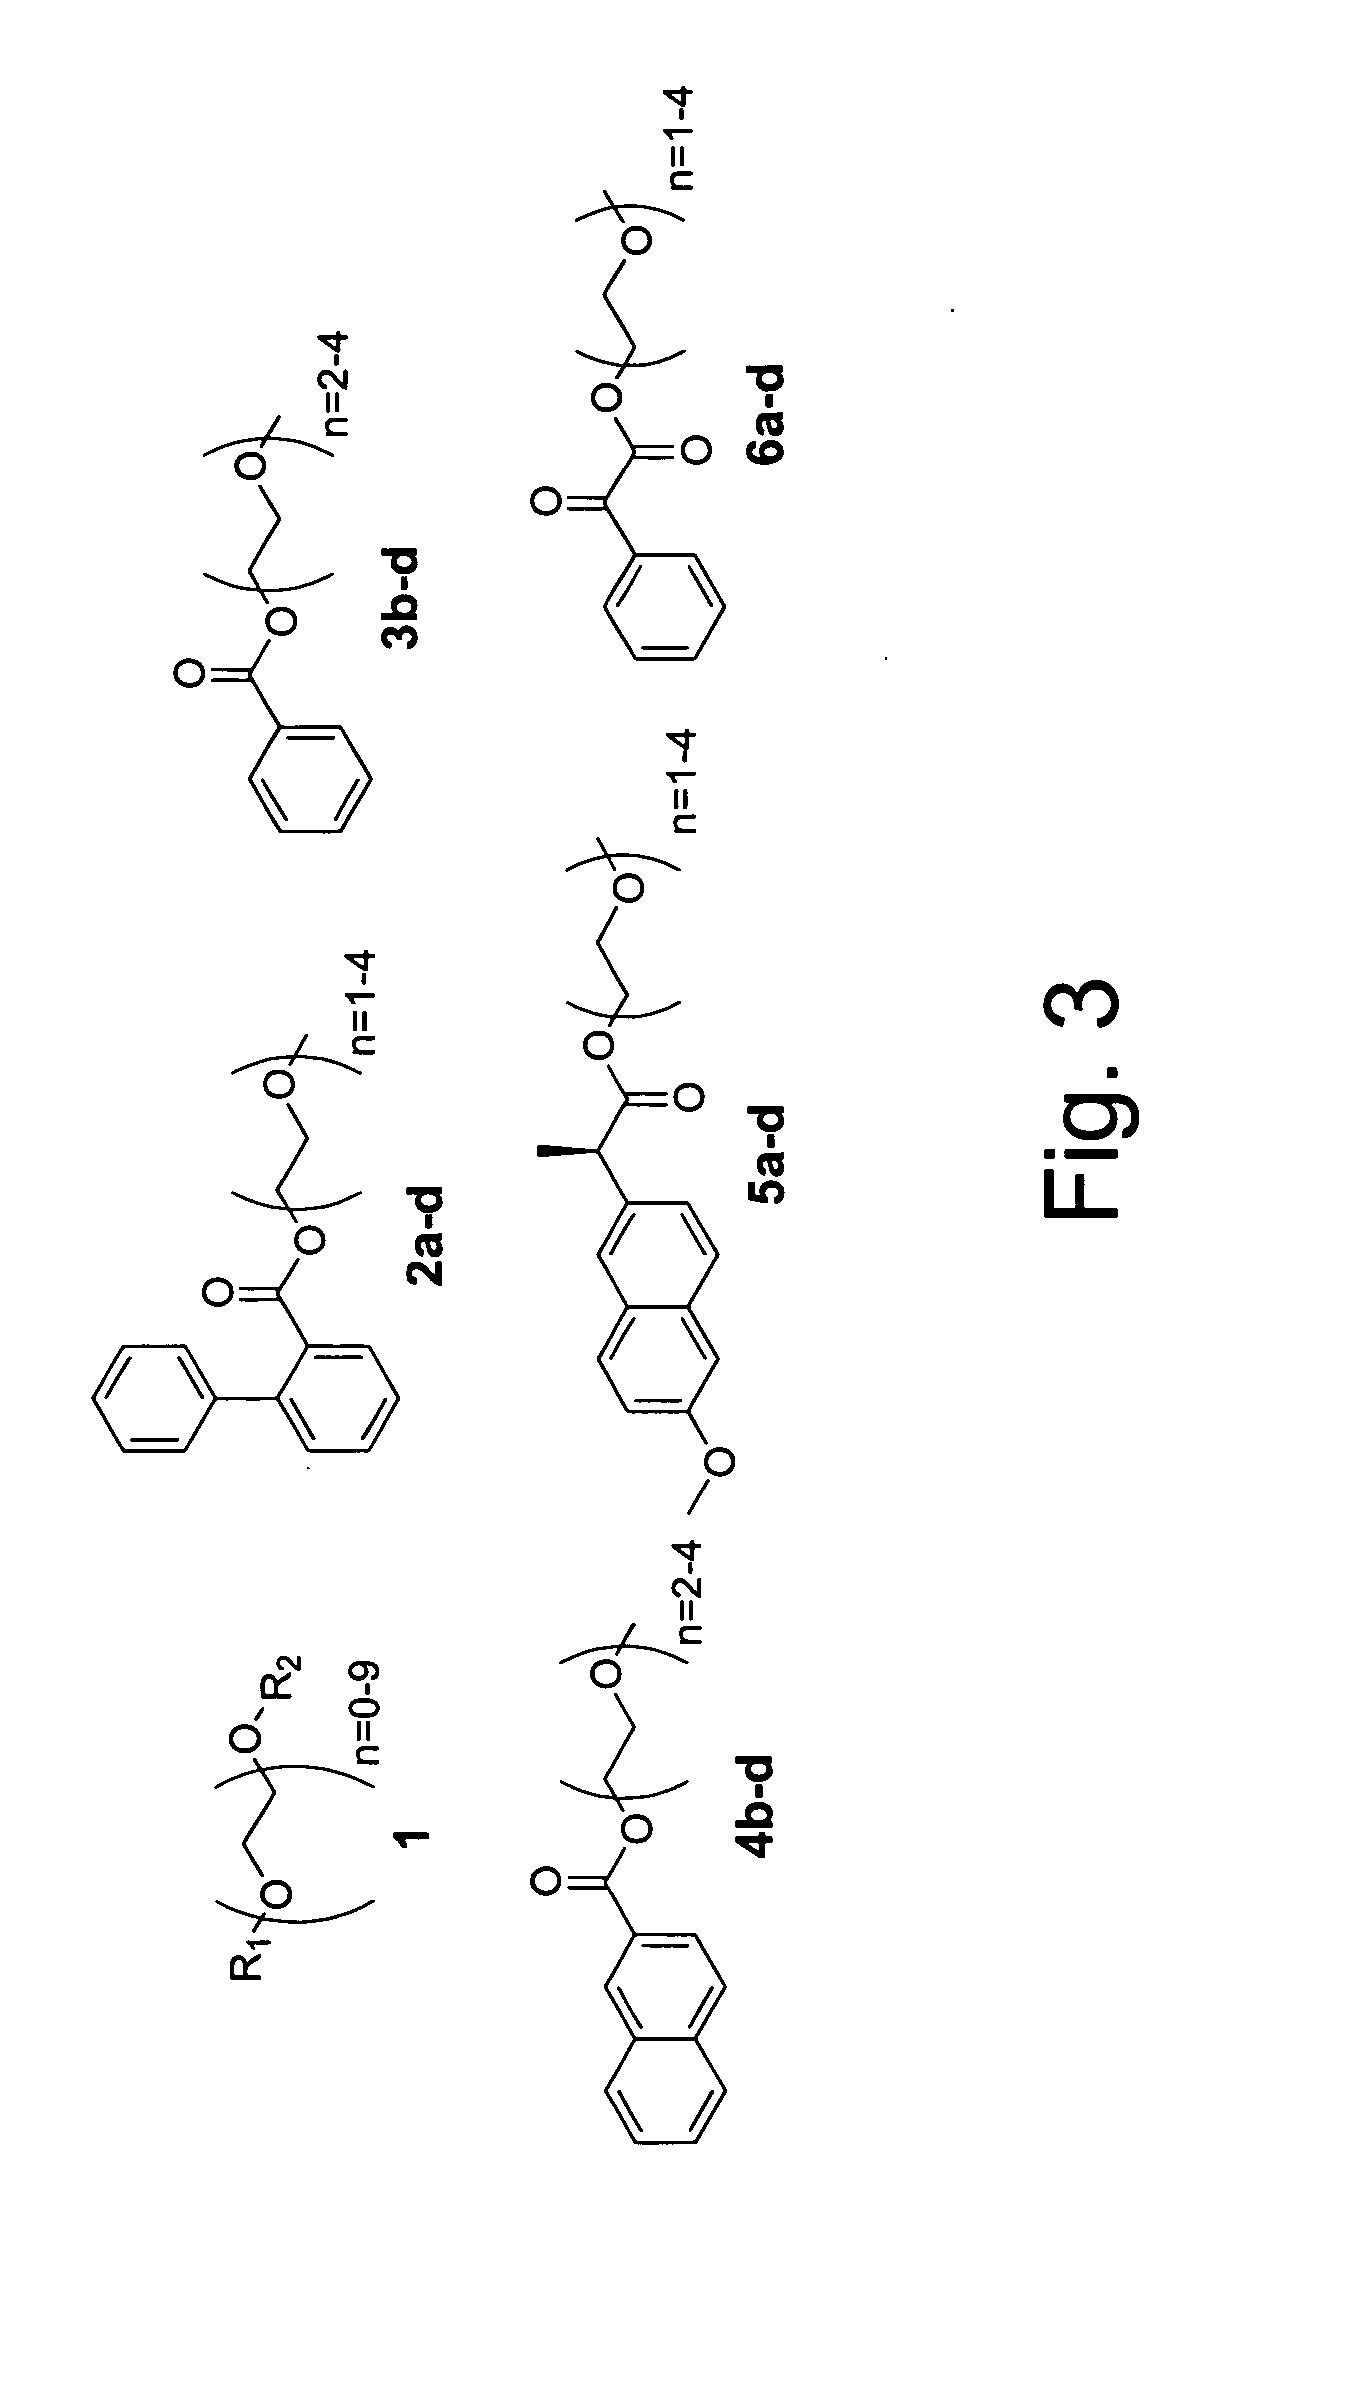 Separation of compounds using tagging moieties including varying numbers of repeat units